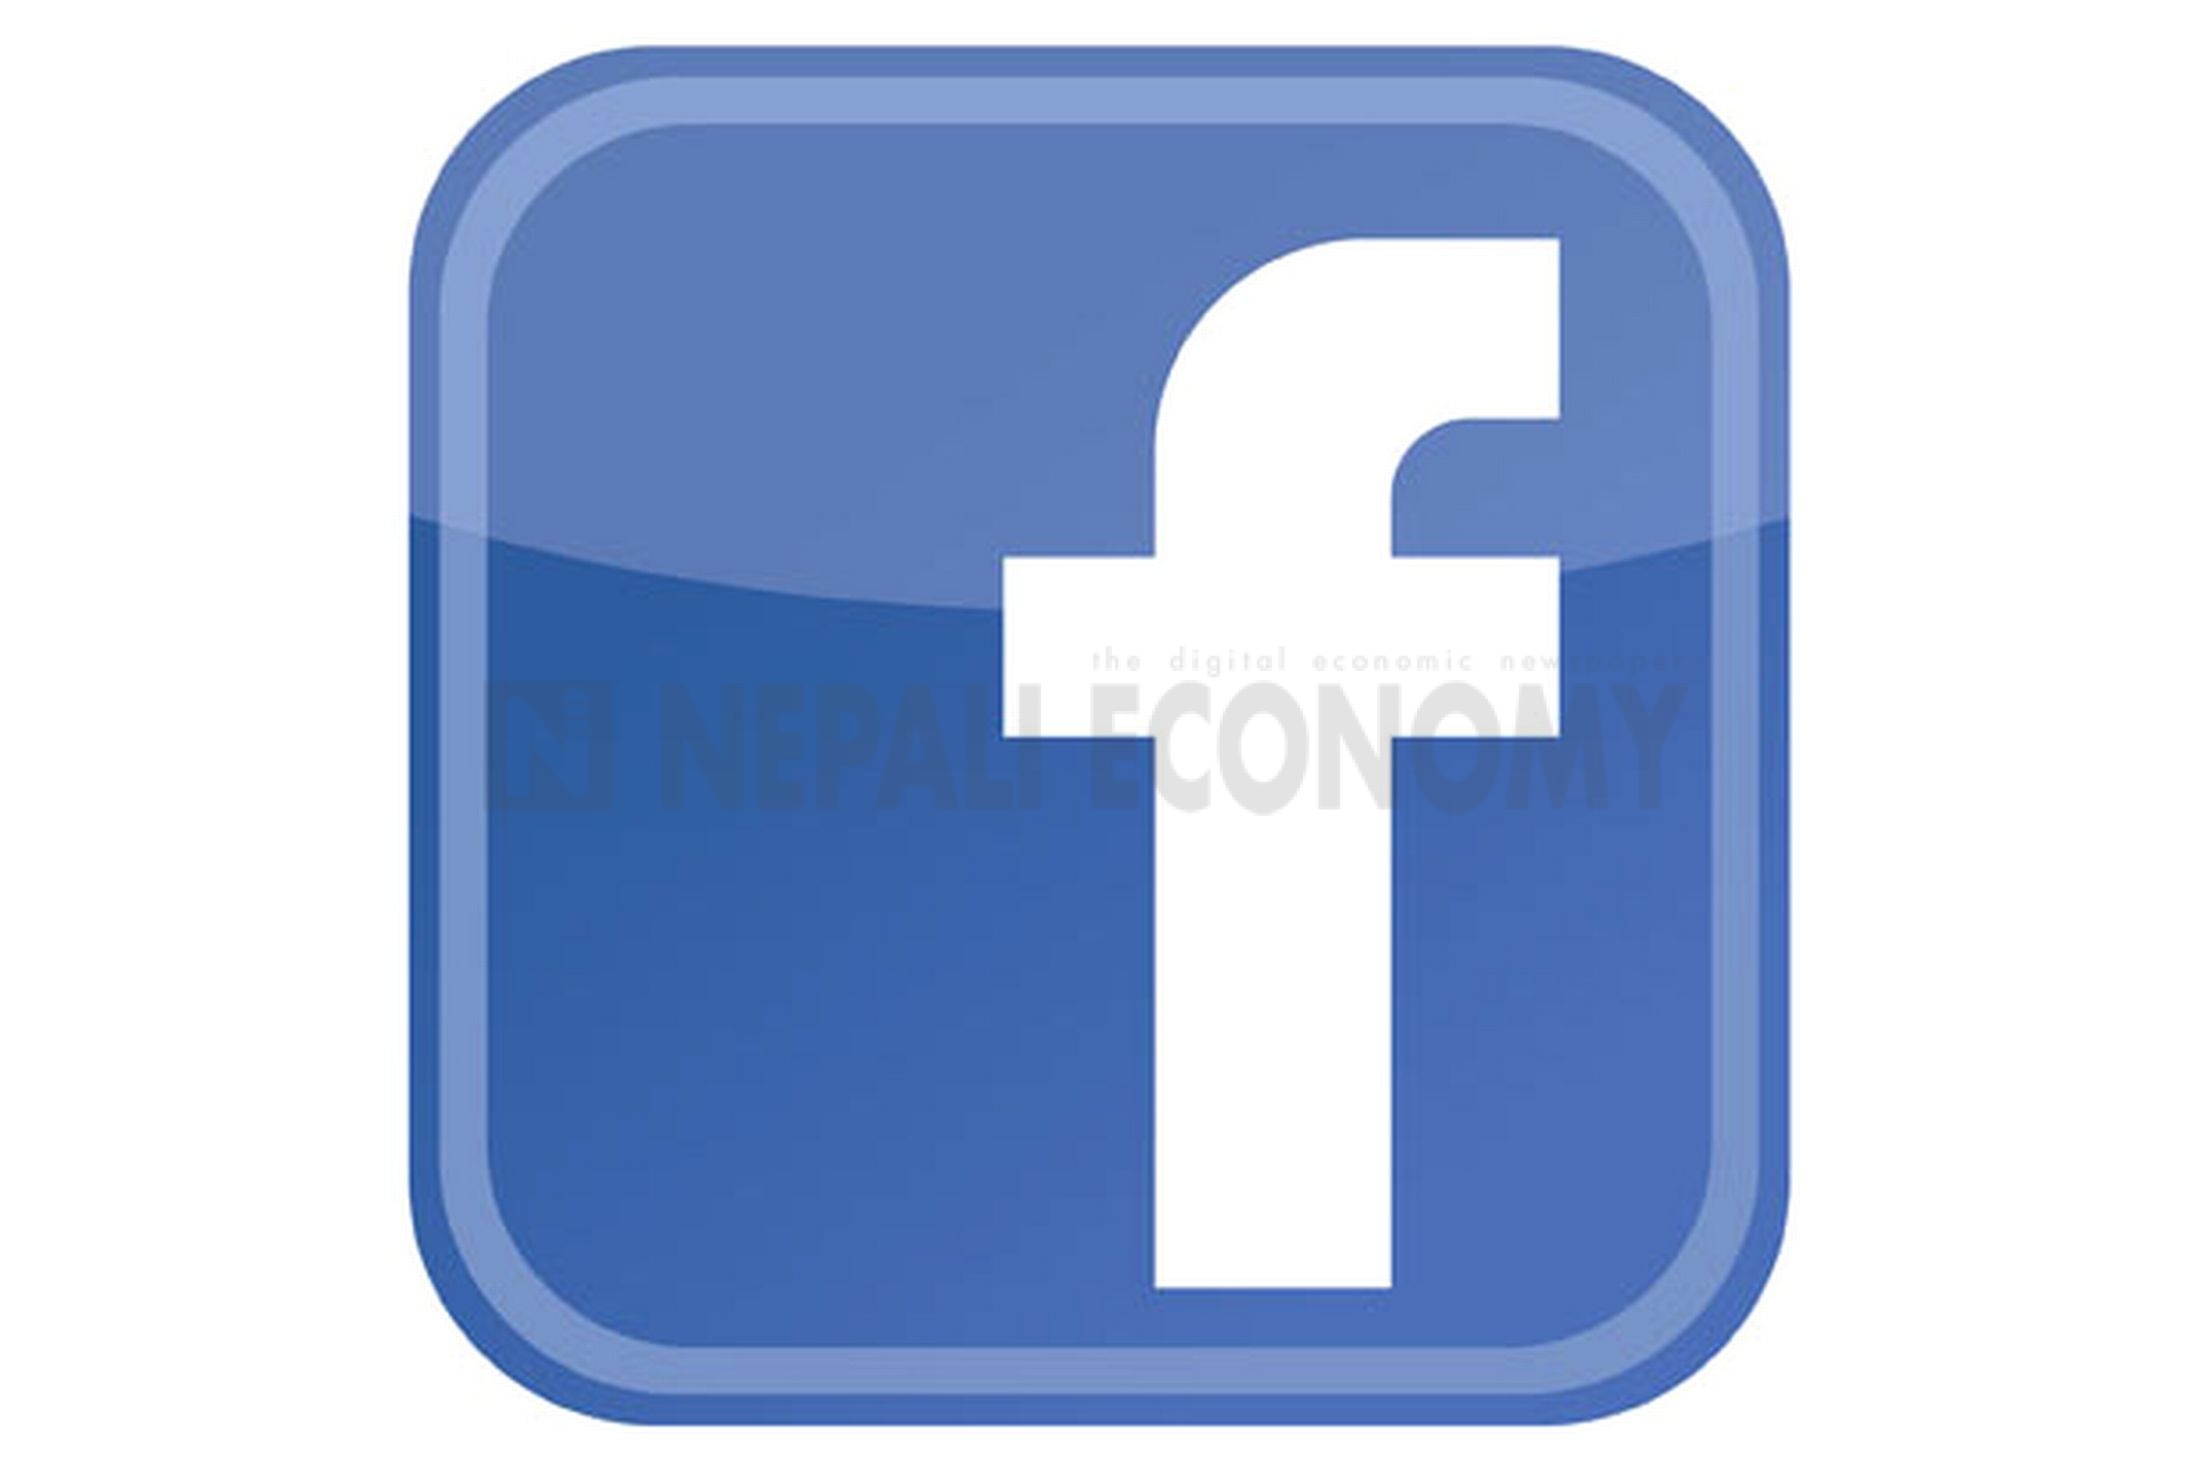 Facebook fourth quarter revenues up by 63 per cent on growth in mobile